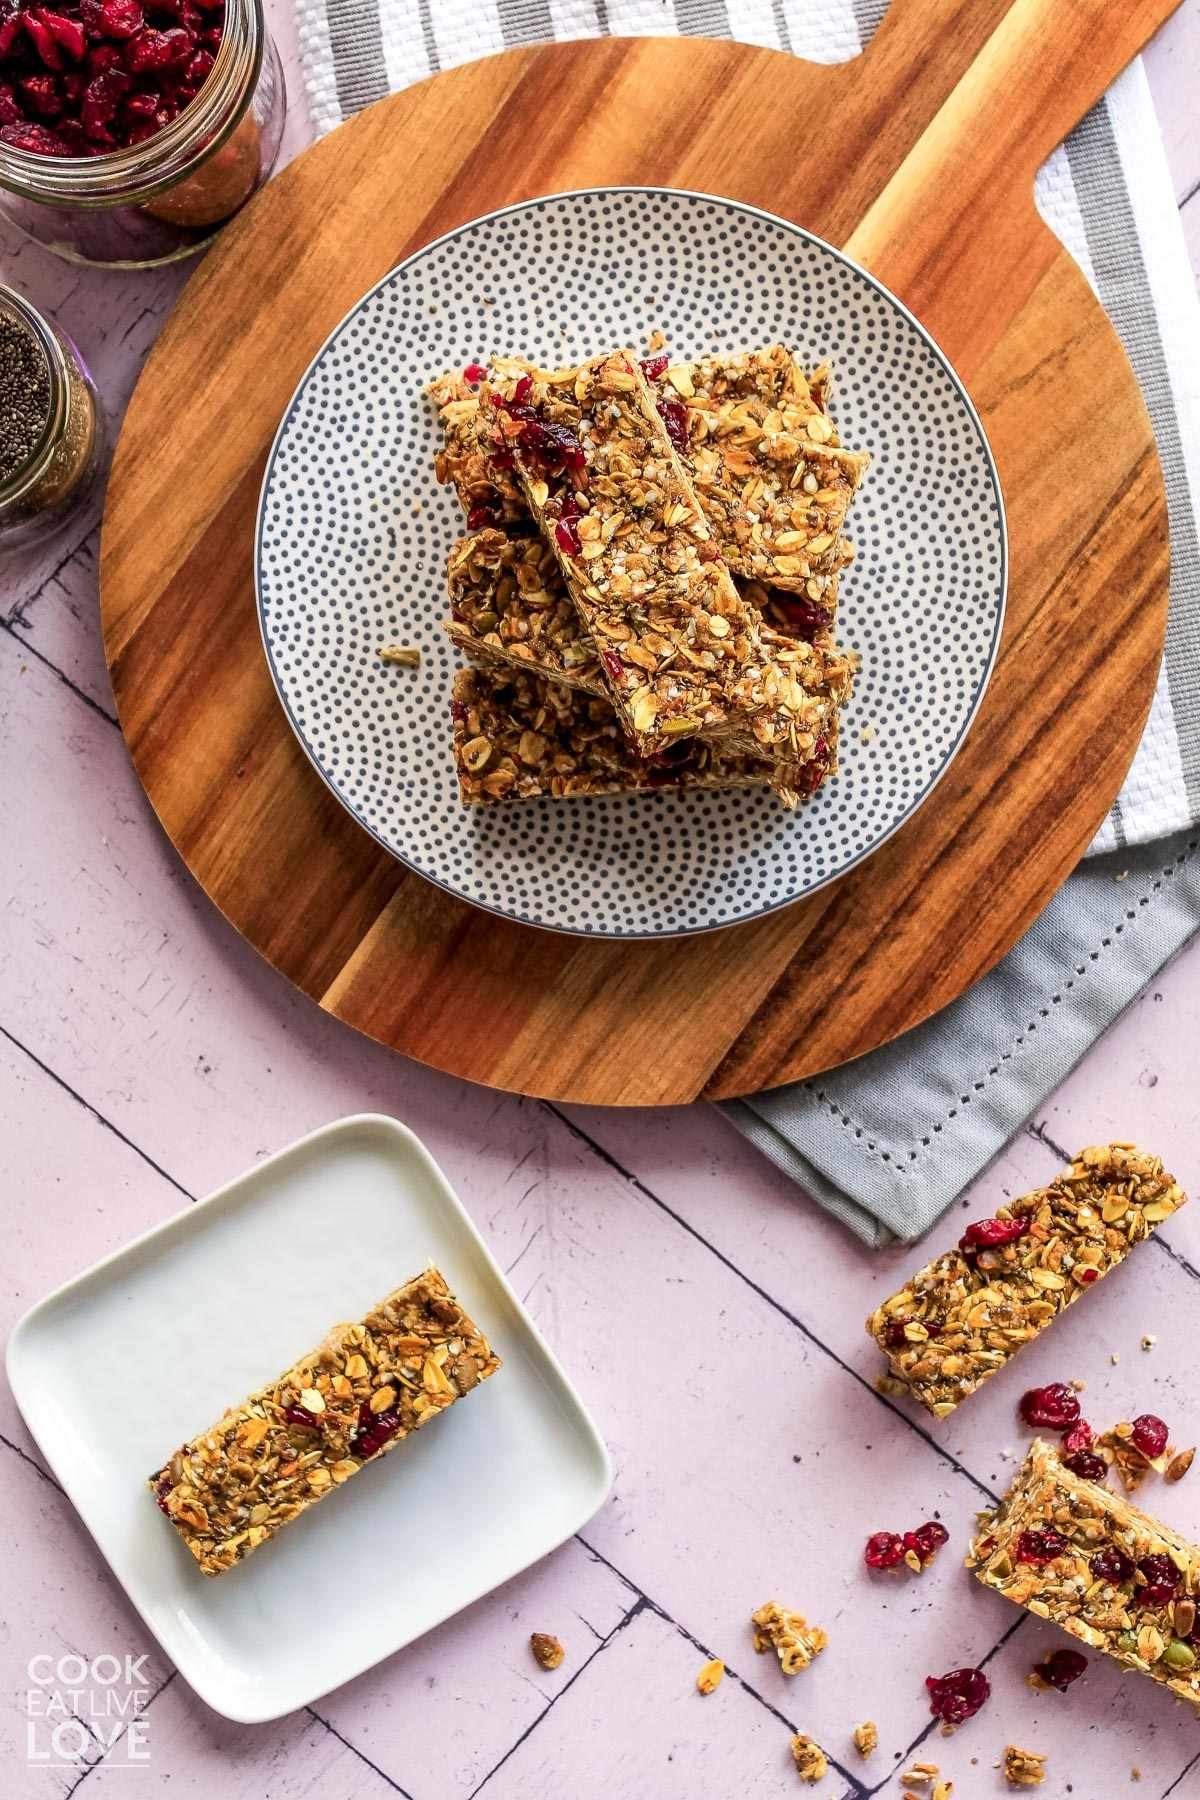 Homemade energy bars on a white and gray polka dotted plate on a round cutting board.